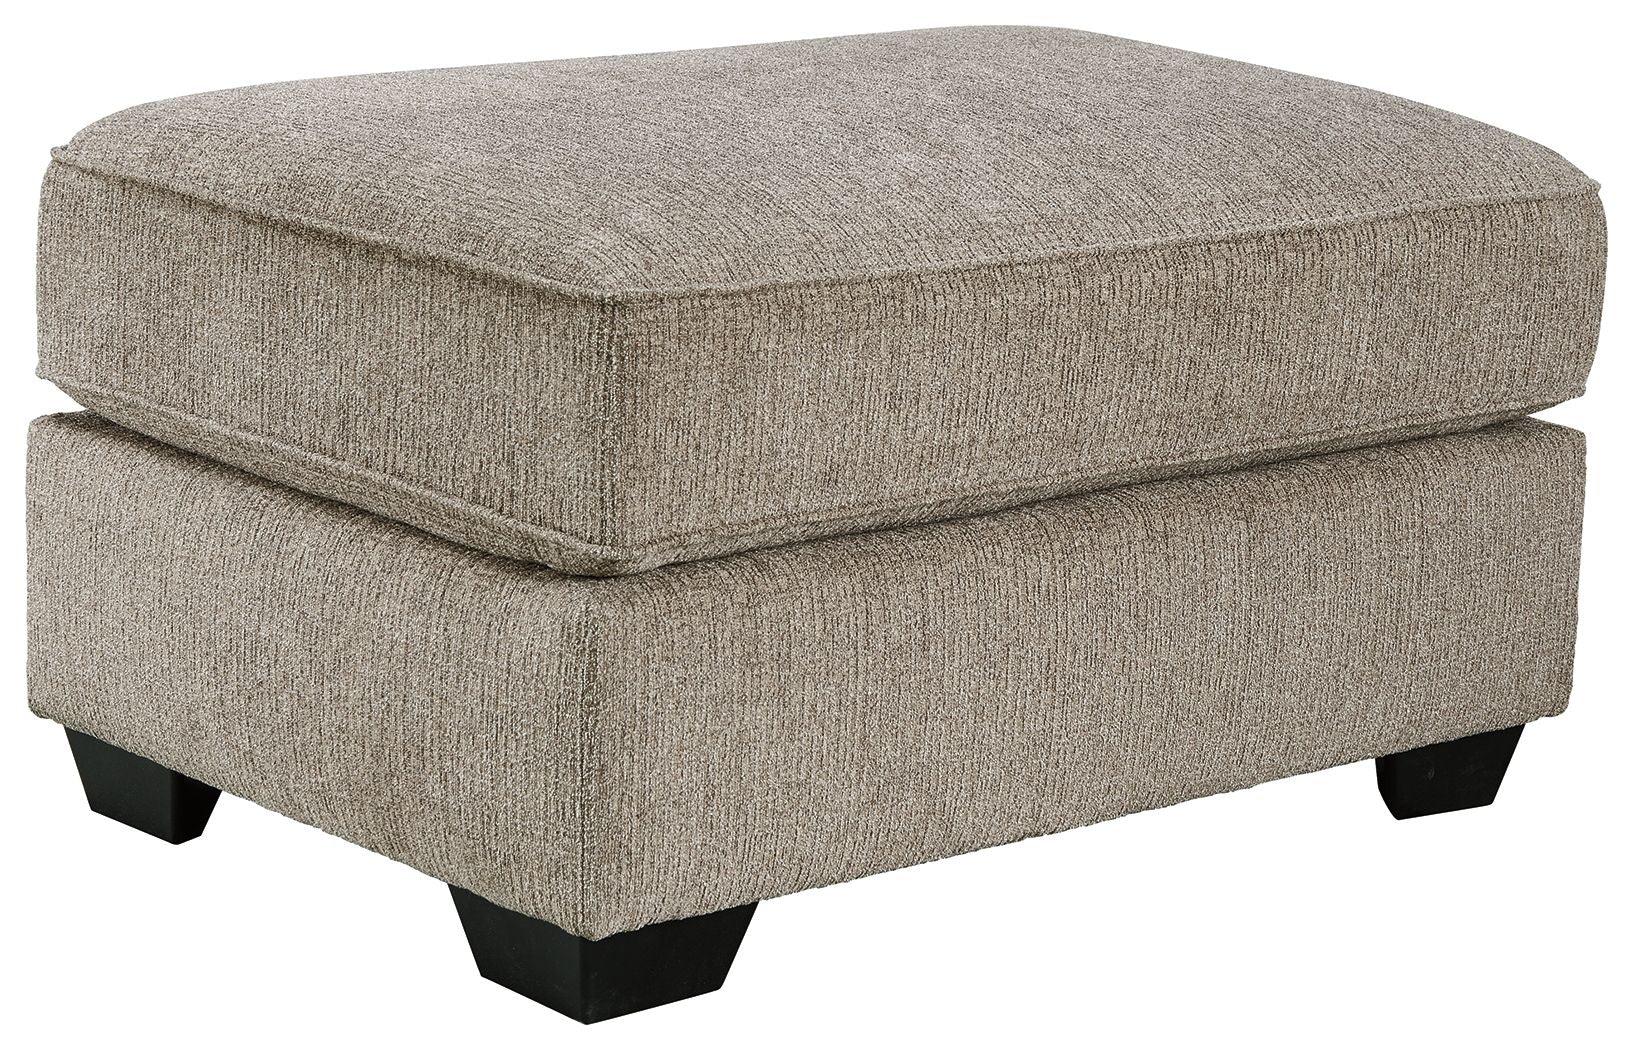 Ashley Furniture - Pantomine - Driftwood - Oversized Accent Ottoman - 5th Avenue Furniture